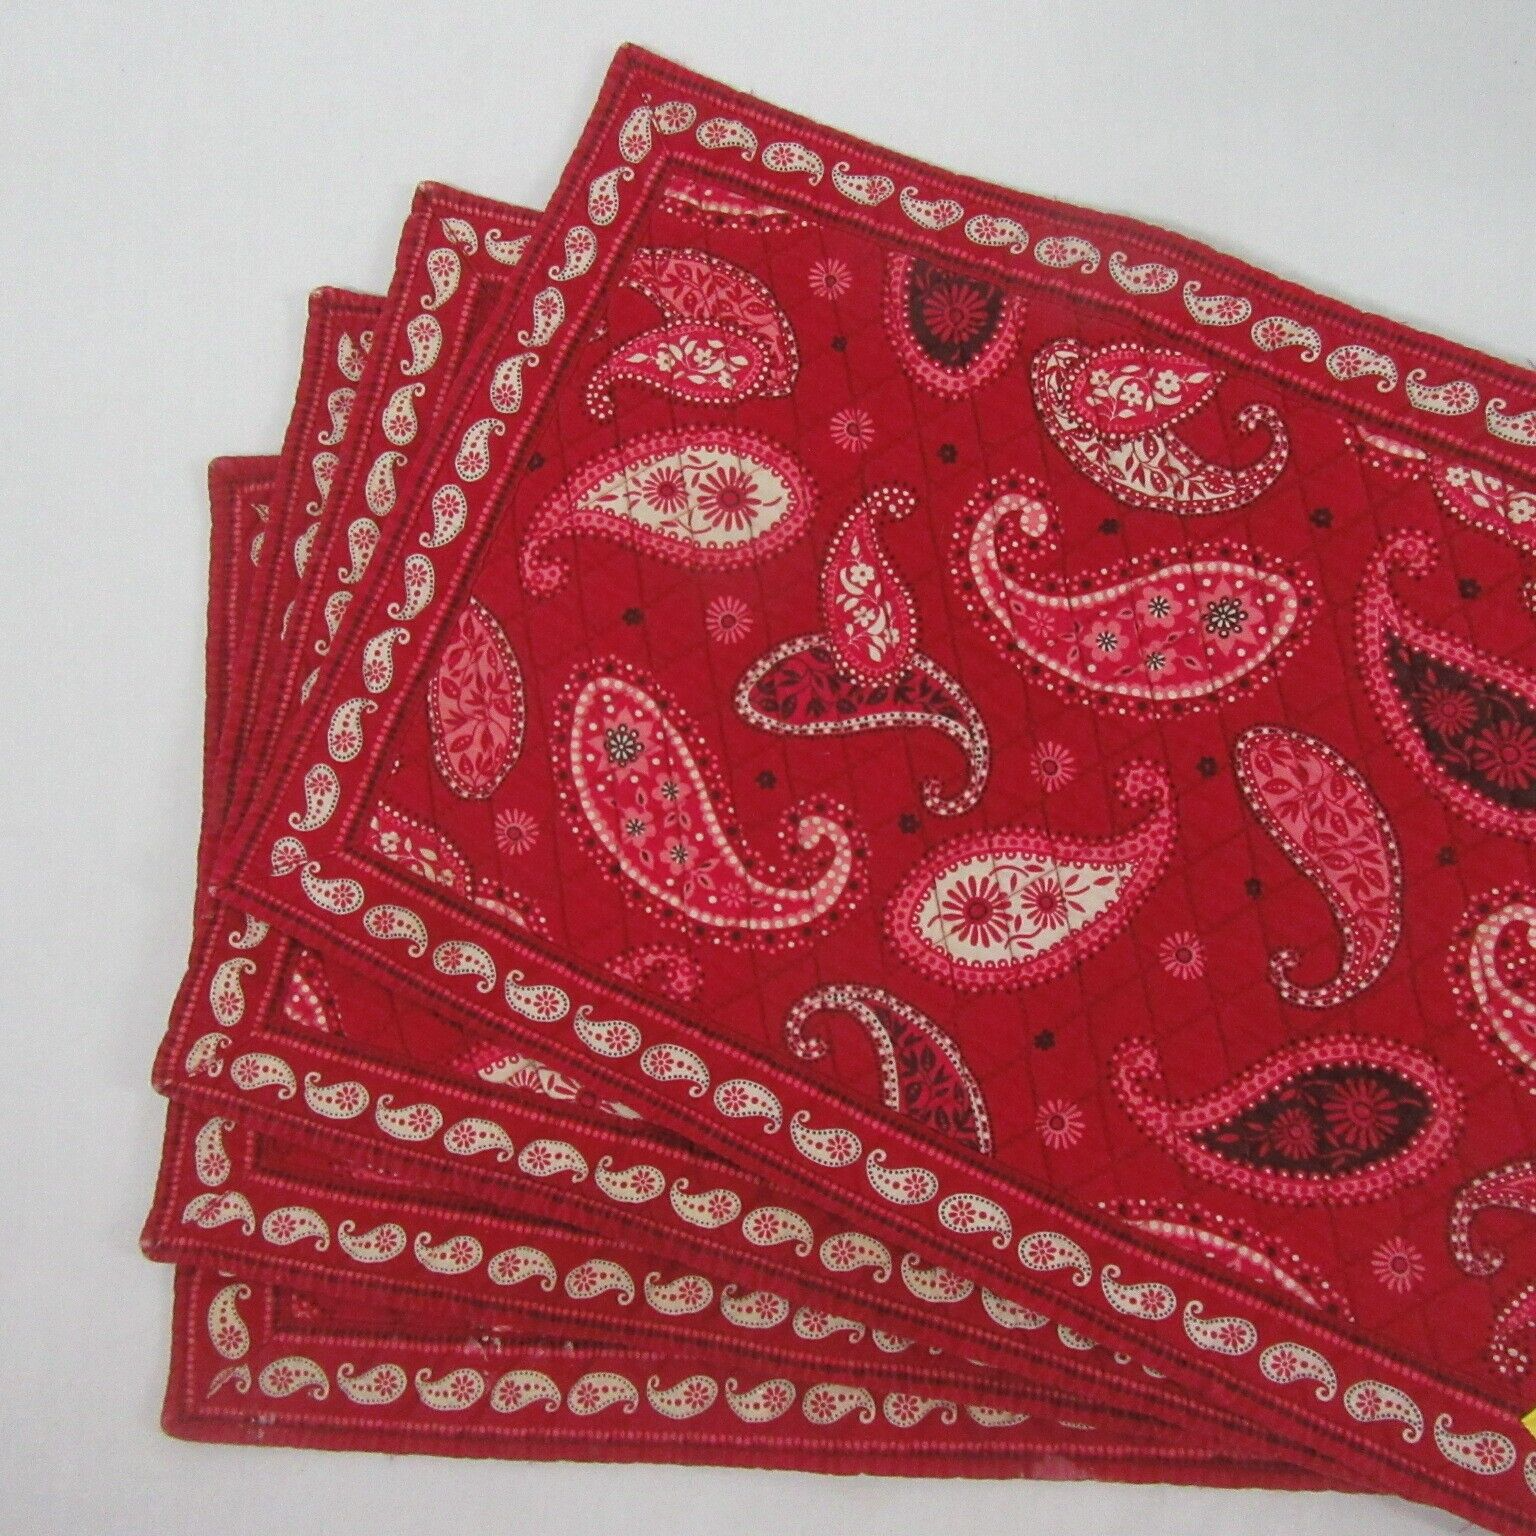 Vera Bradley Mesa Paisley Red Multi Quilted 4-PC Placemat Set RARE - $58.00